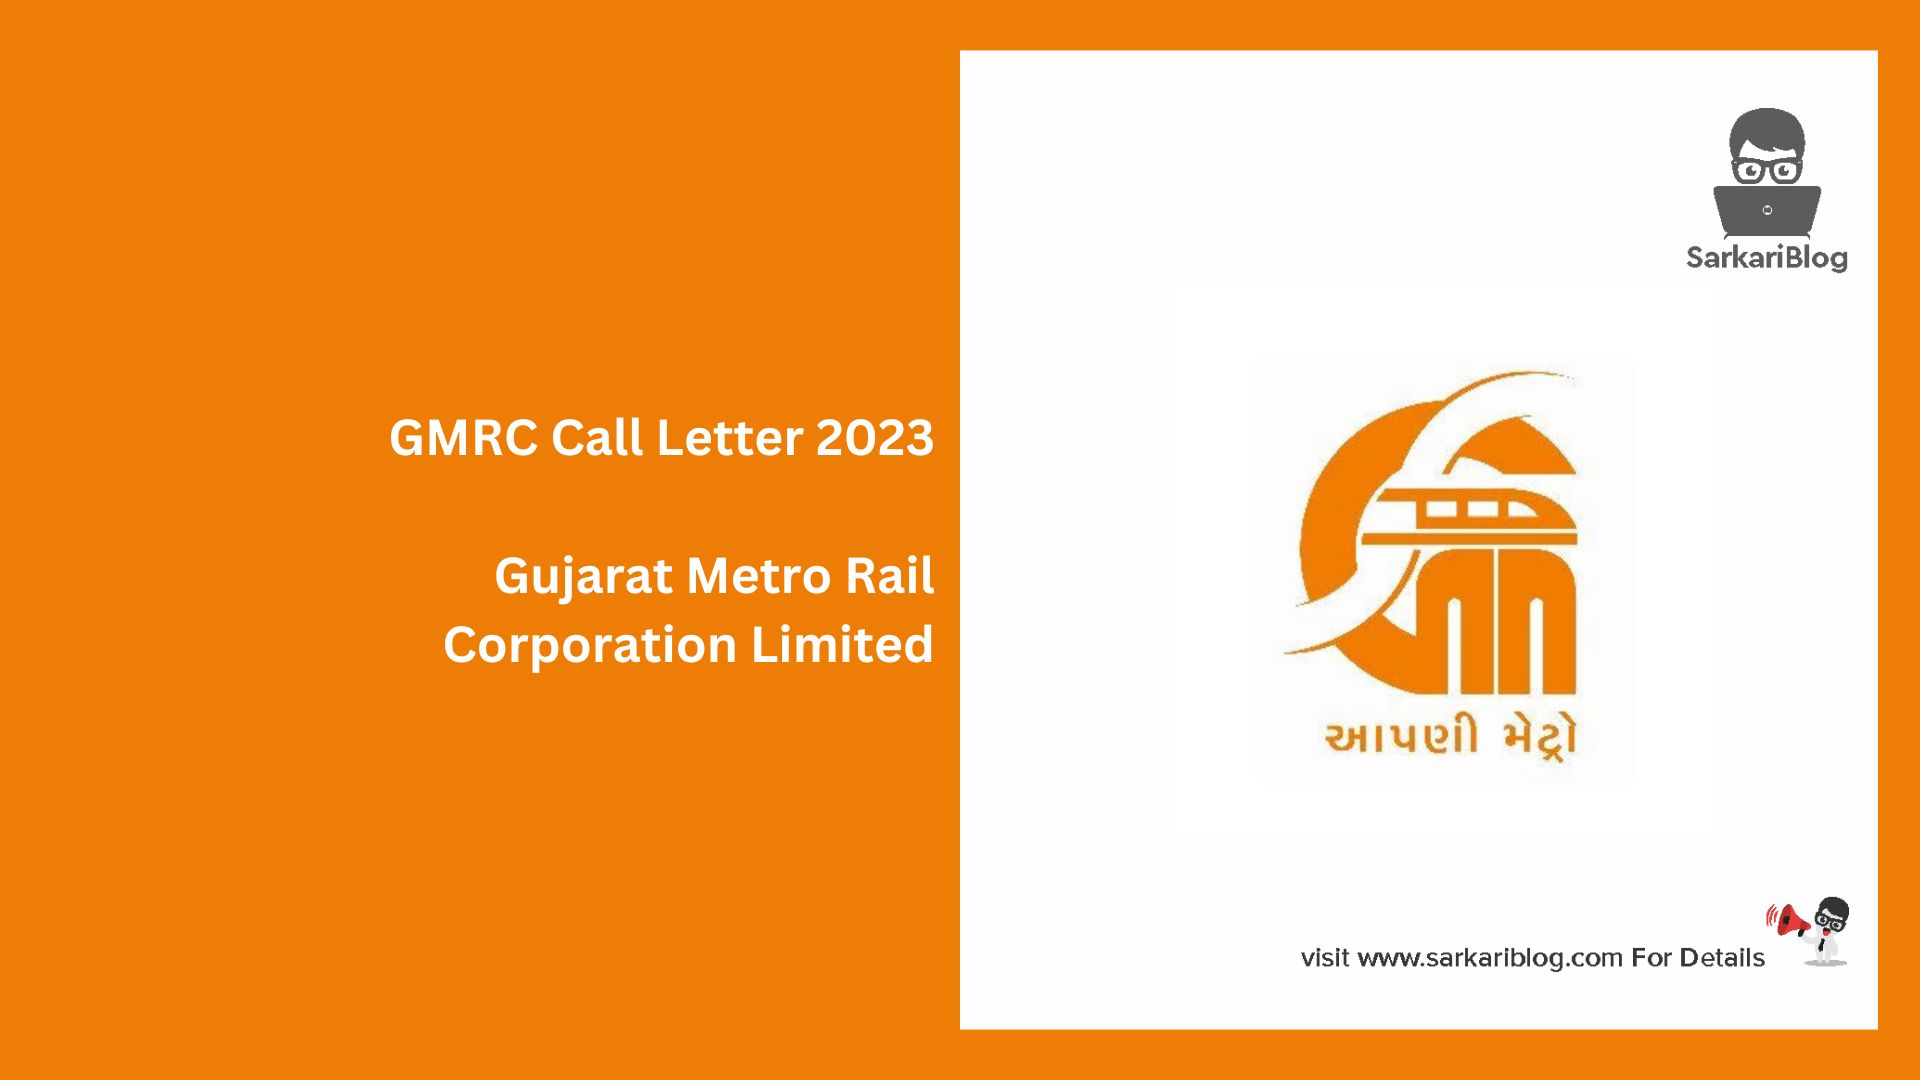 GMRC Call Letter 2023